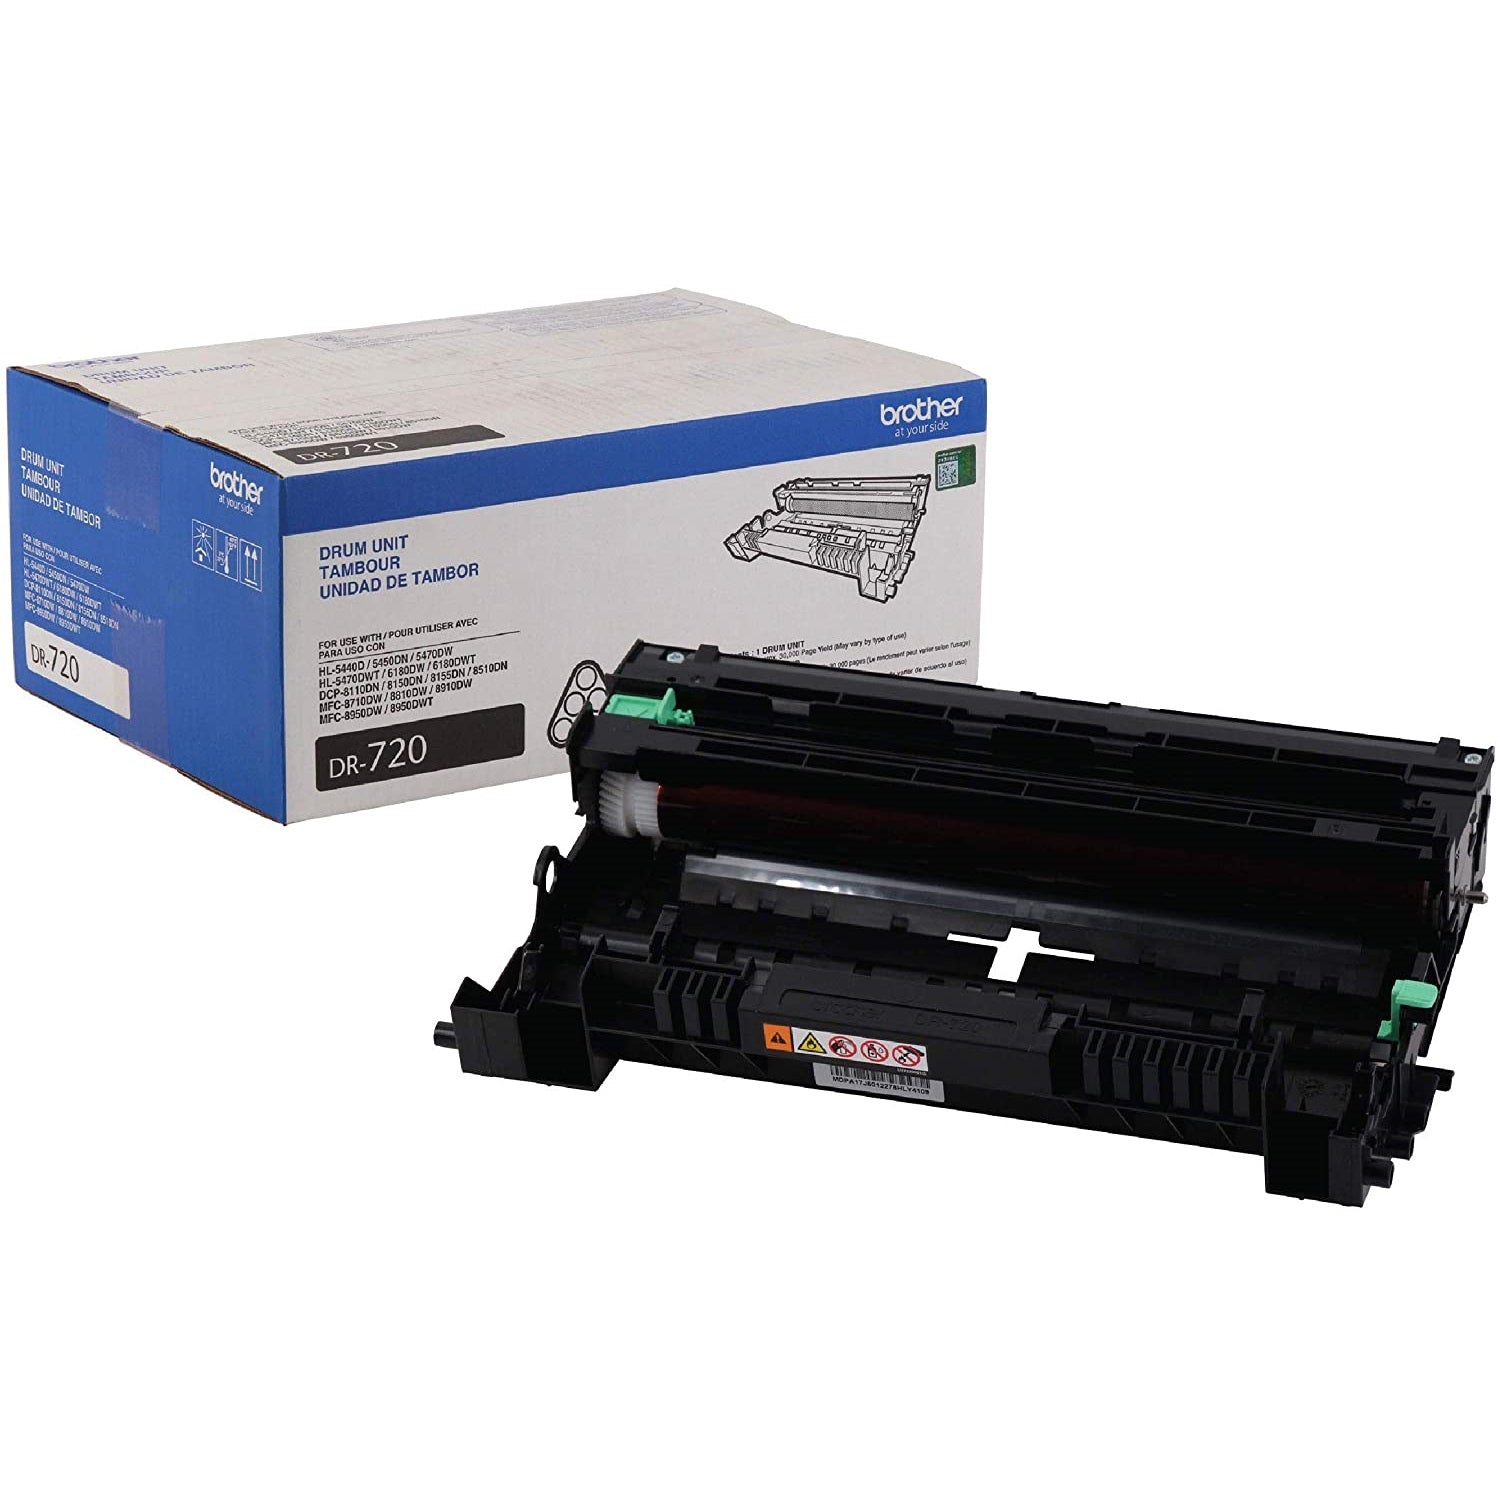 Absolute Toner Brother DR720 Black Genuine Drum Unit | Yields Up to 30,000 Pages Original Brother Cartridges